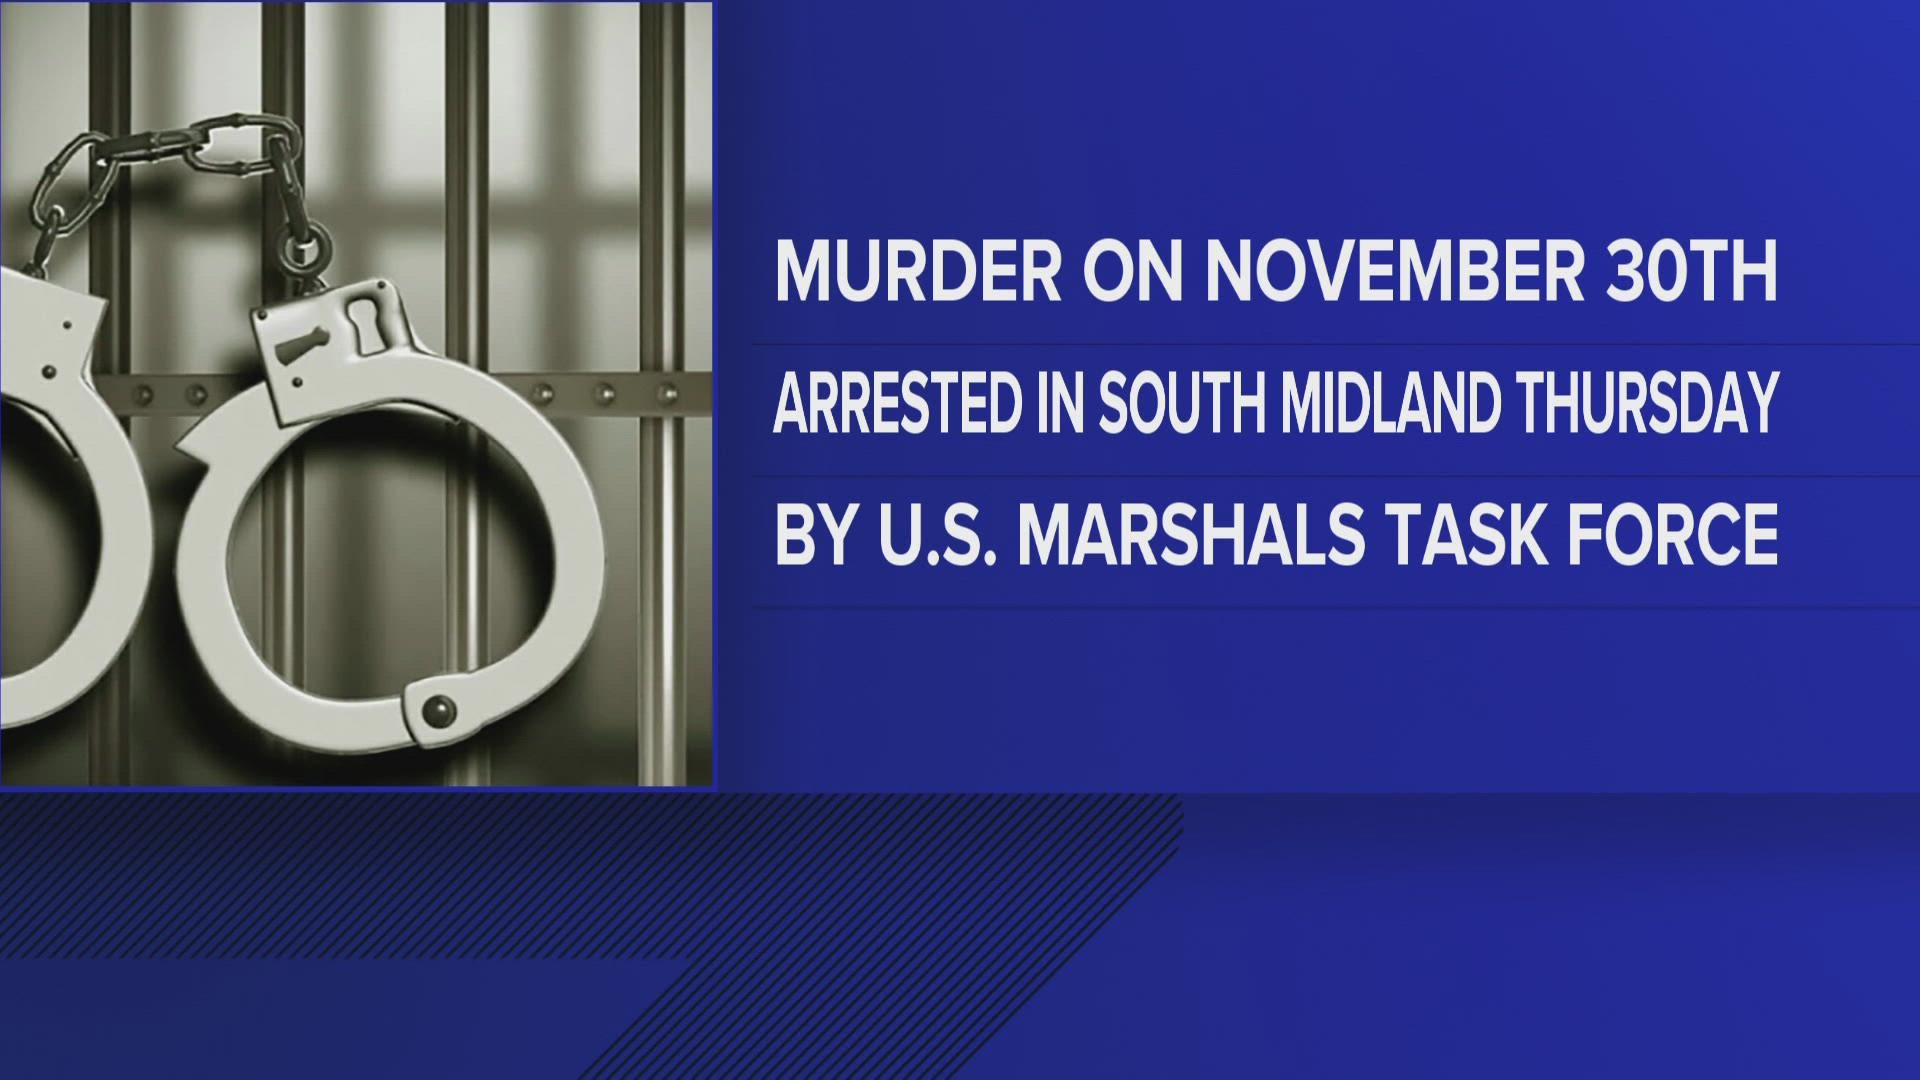 Not much is known about the murder at this time, except that it occurred in Midland on Nov. 30, 2022.